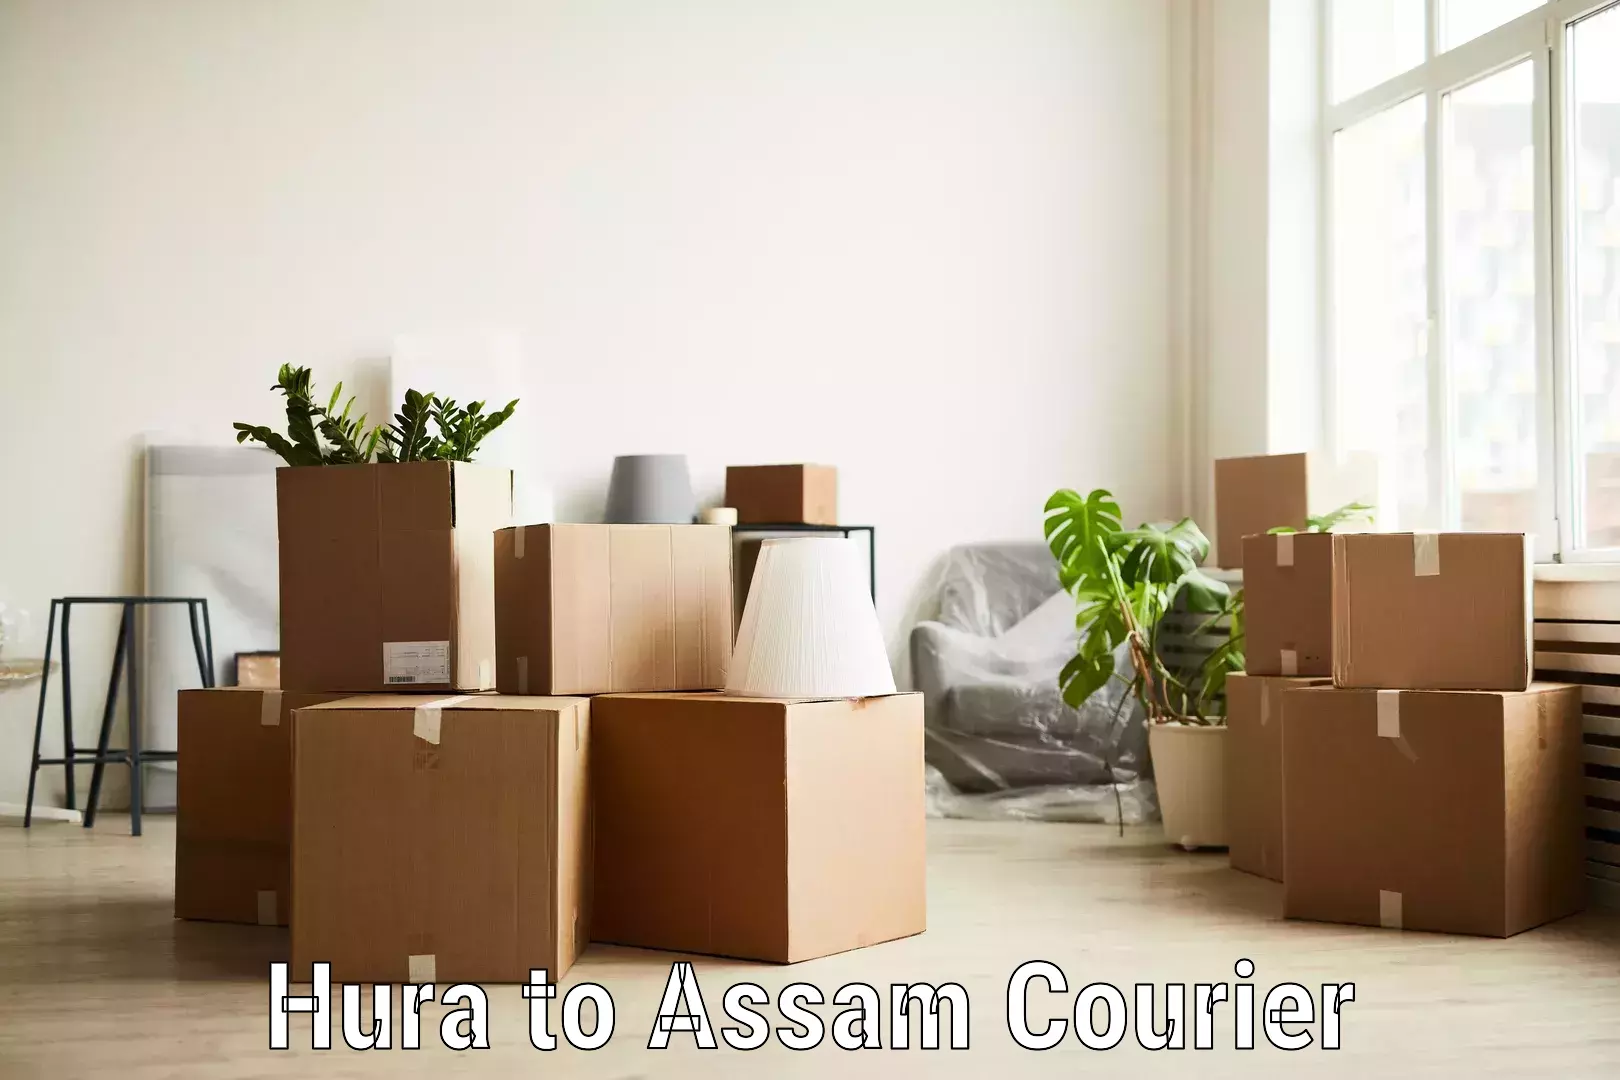 Courier service efficiency Hura to Assam